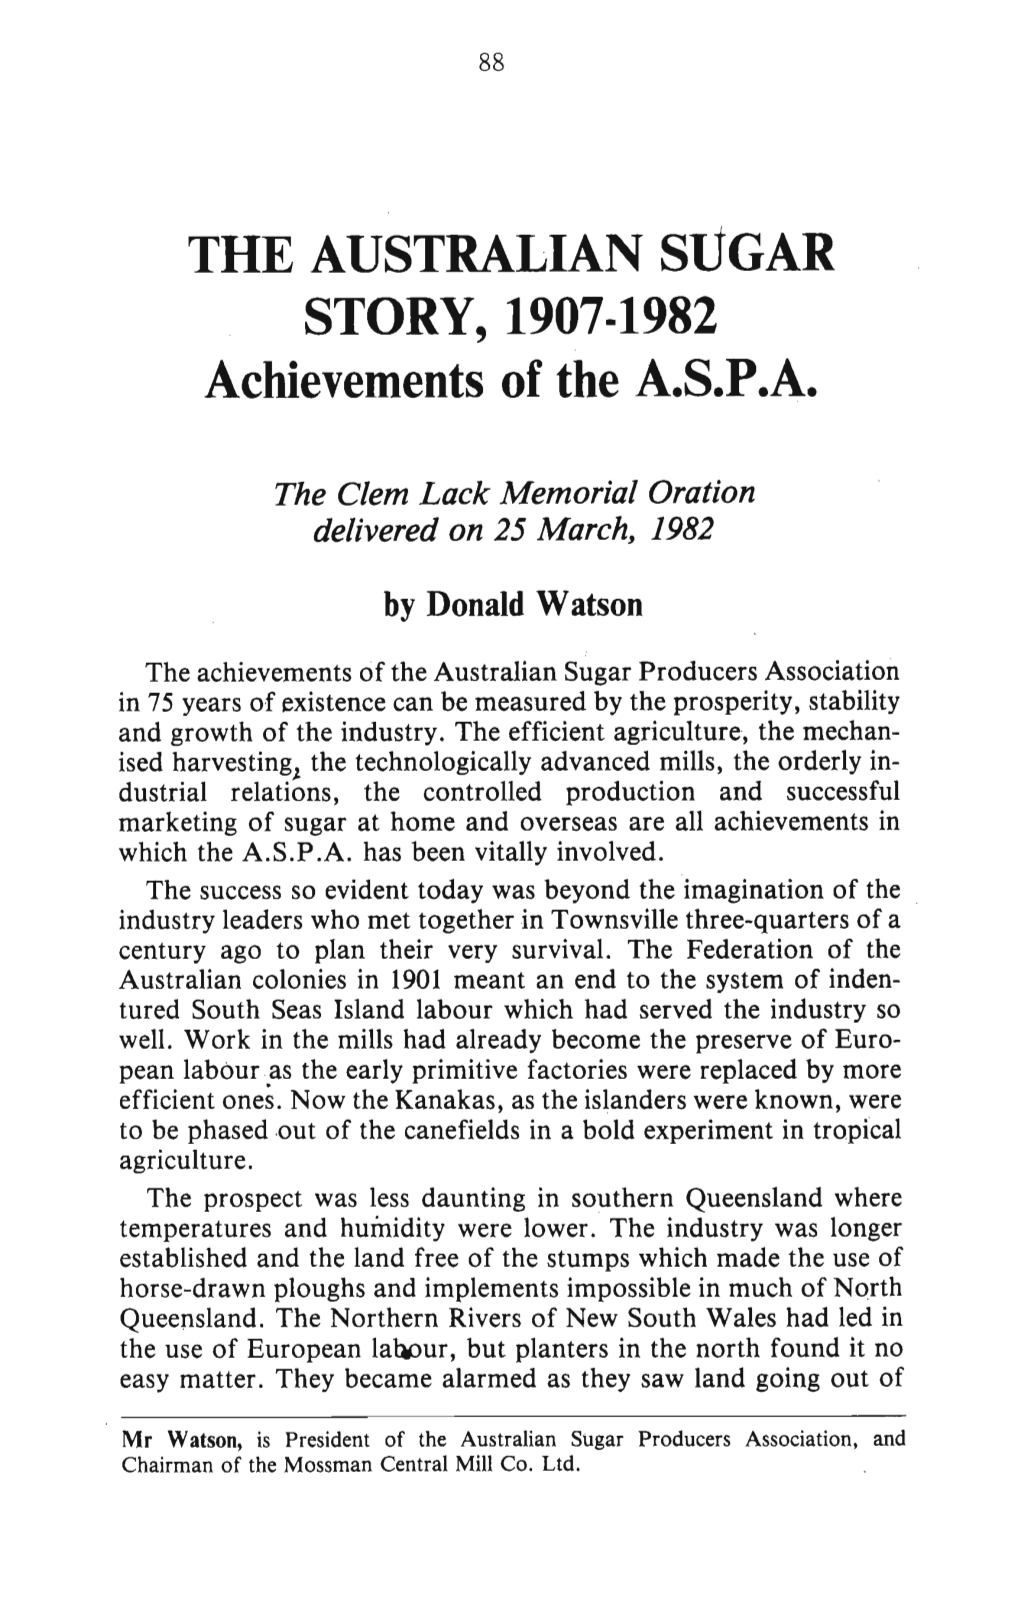 THE AUSTRALIAN Stgar STORY, 19071982 Achievements of the A.S.P.A